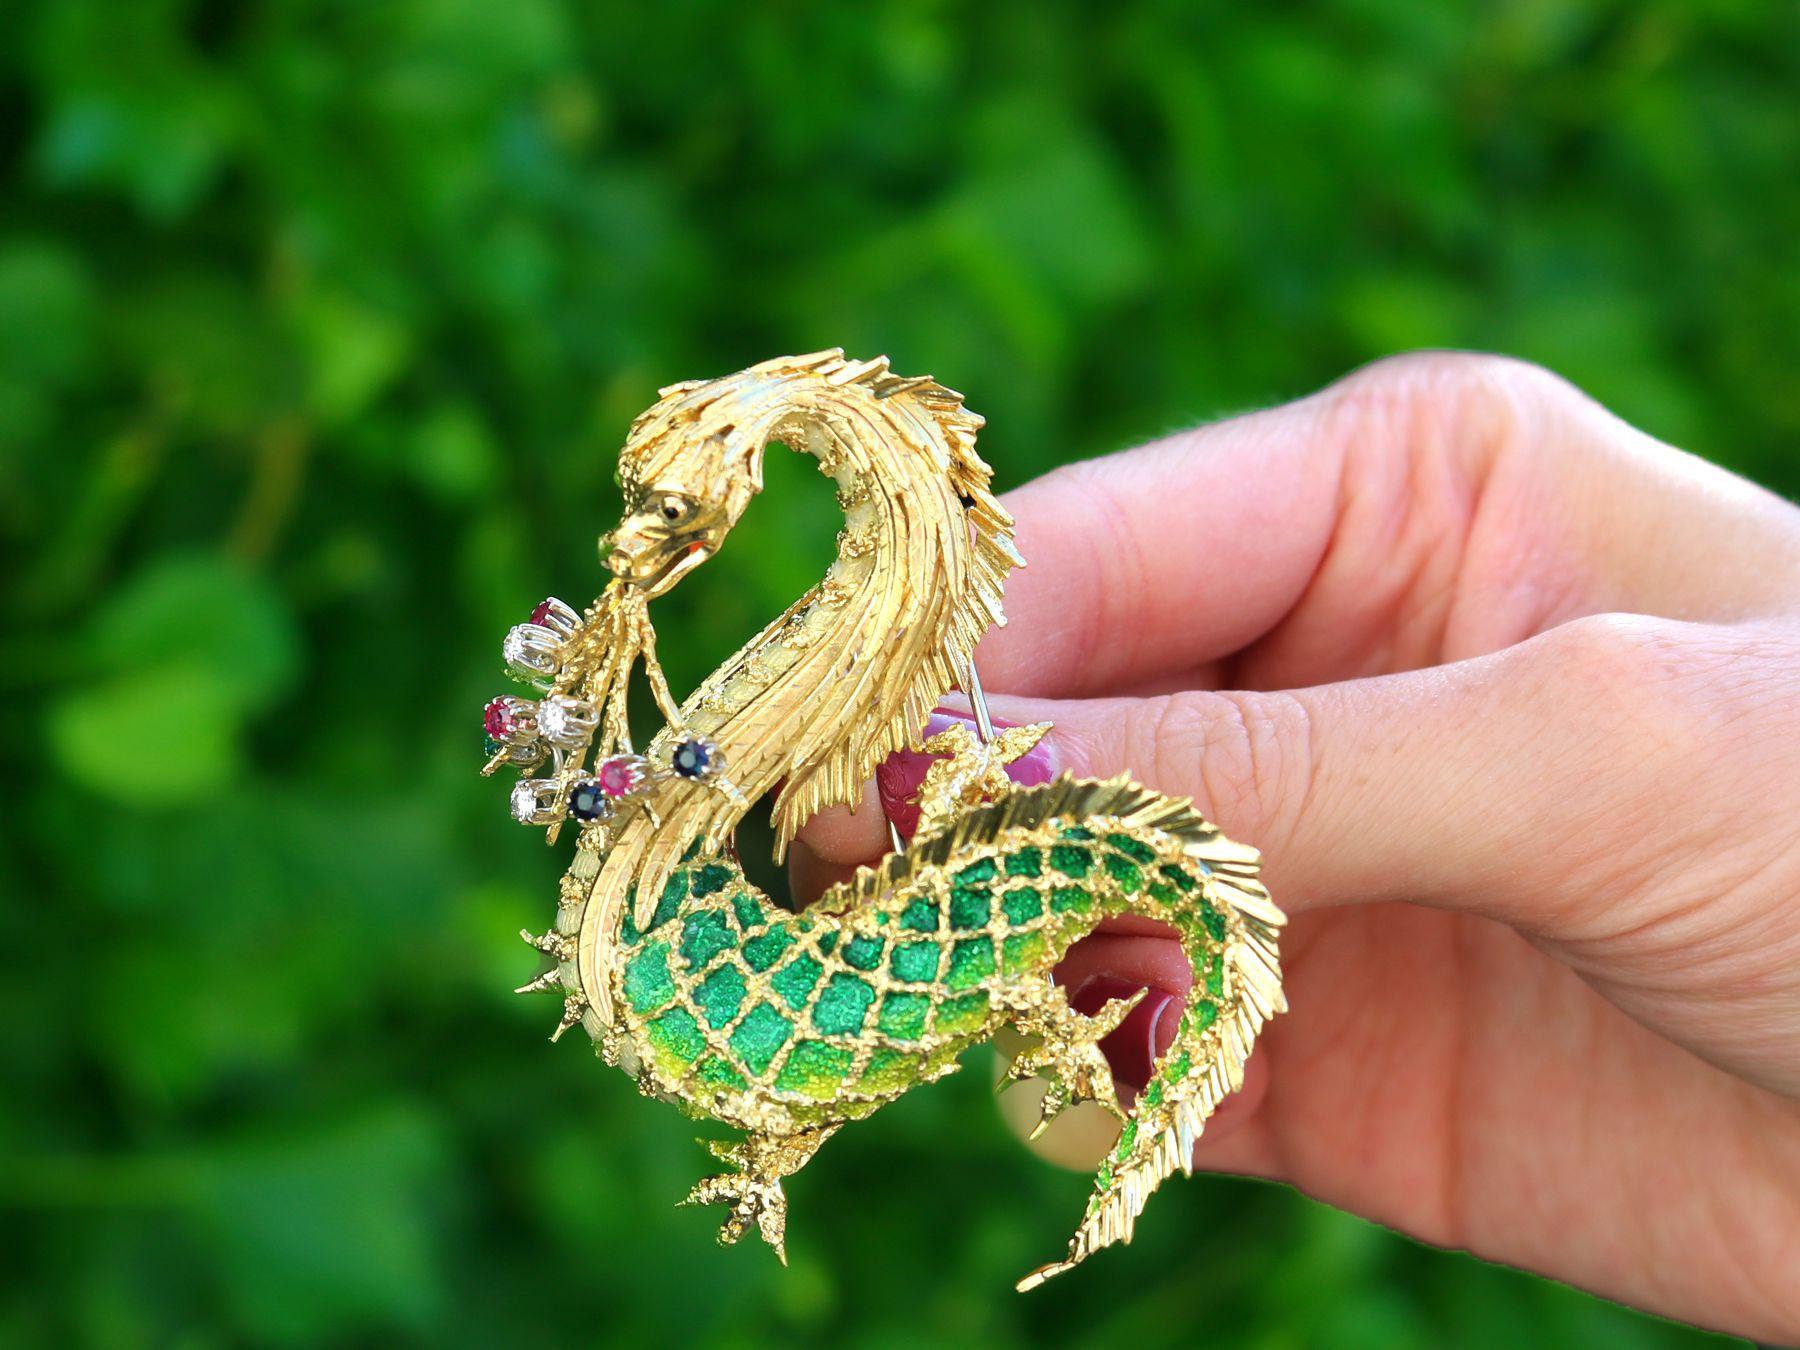 An exceptional, fine and impressive vintage 0.20 carat diamond, 0.20 carat ruby, 0.21 carat sapphire, hot enamel and 18 karat yellow gold dragon brooch; part of our diverse jewelry collections

This exceptional, fine and impressive vintage gold